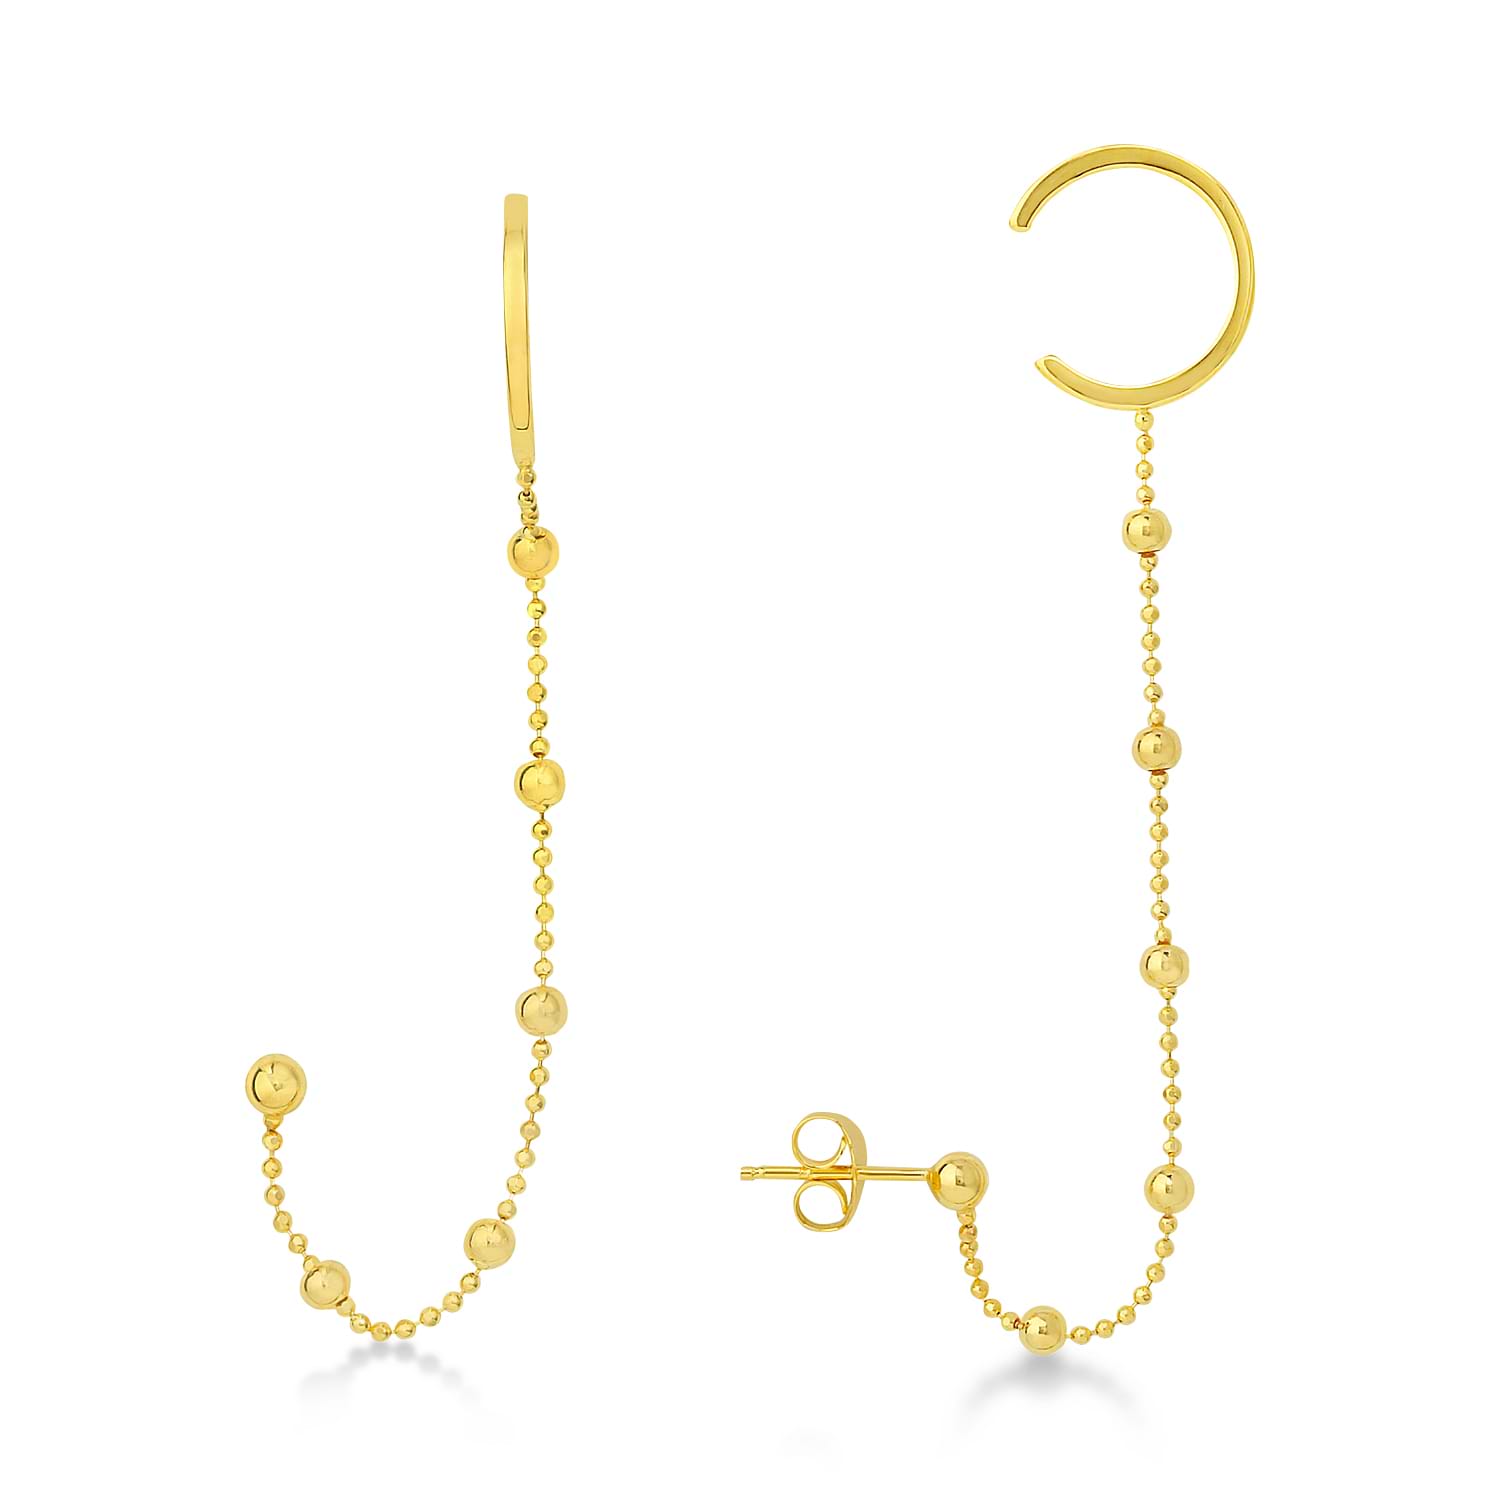 Beaded Dangling Earrings With Cuff 14k Yellow Gold